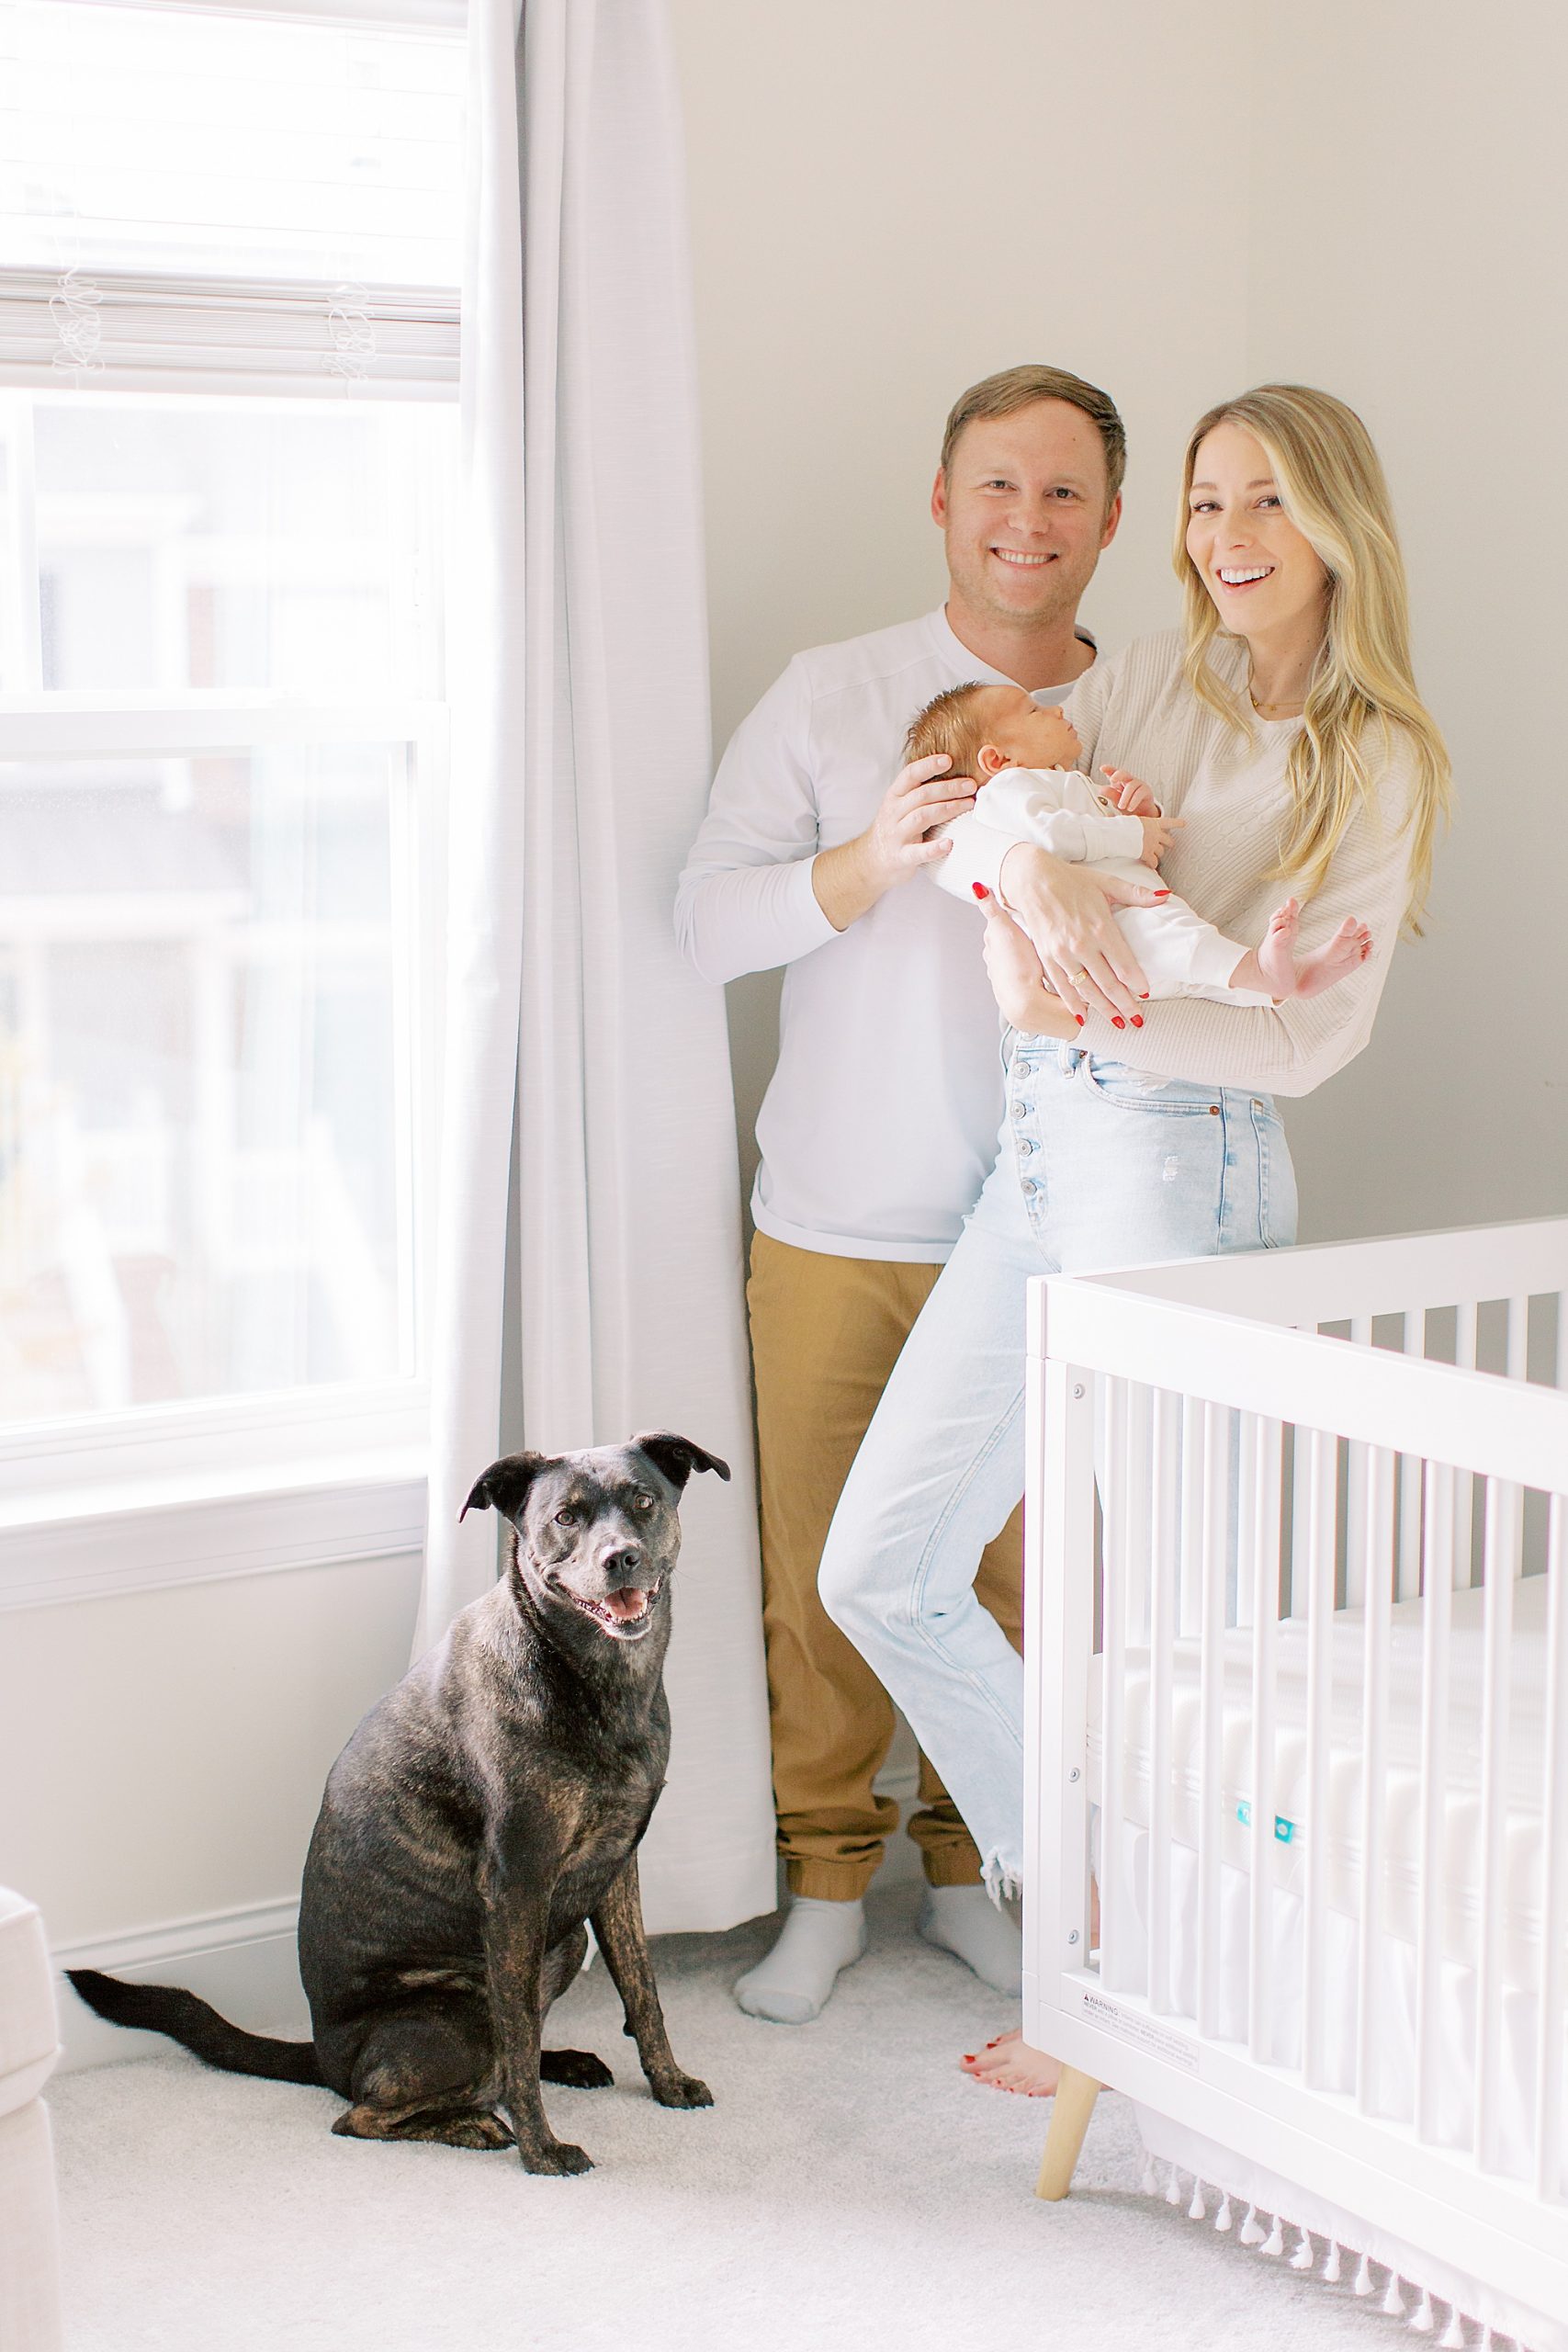 parnets pose with dog and crib during lifestyle newborn session